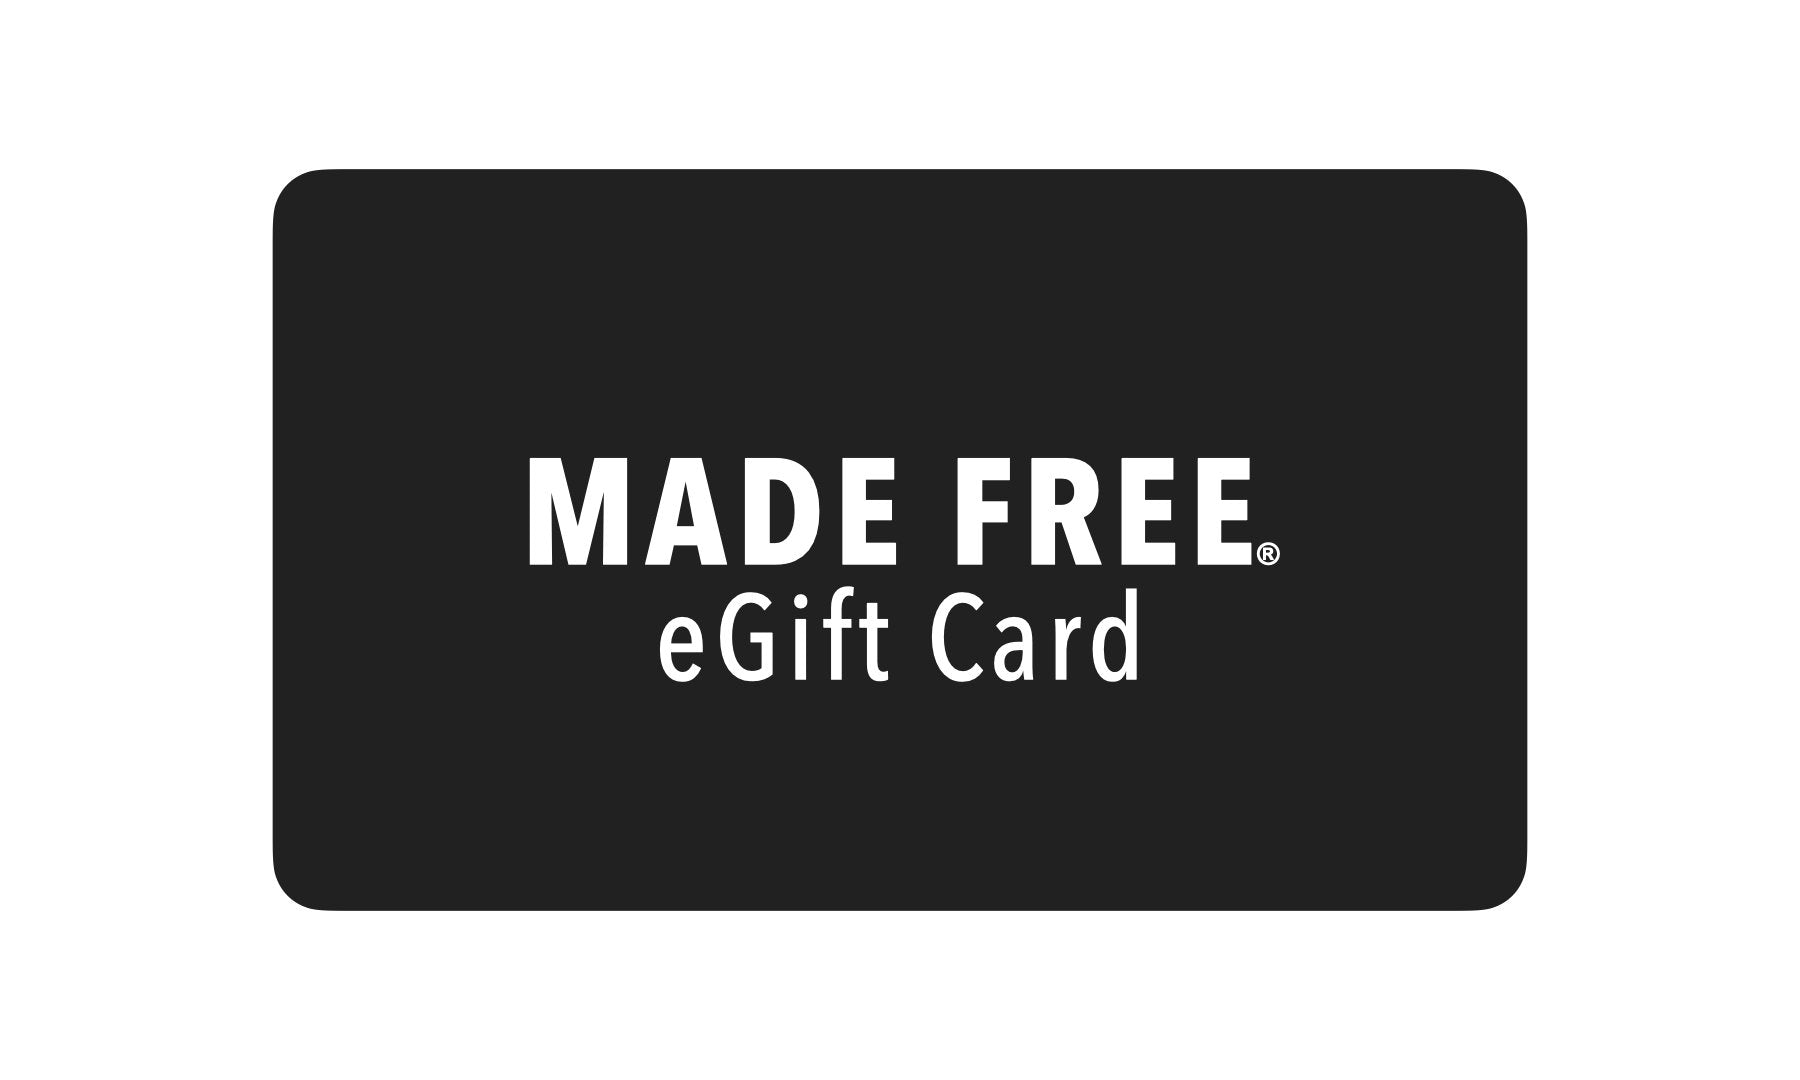 GIFT CARD – MADE FREE®